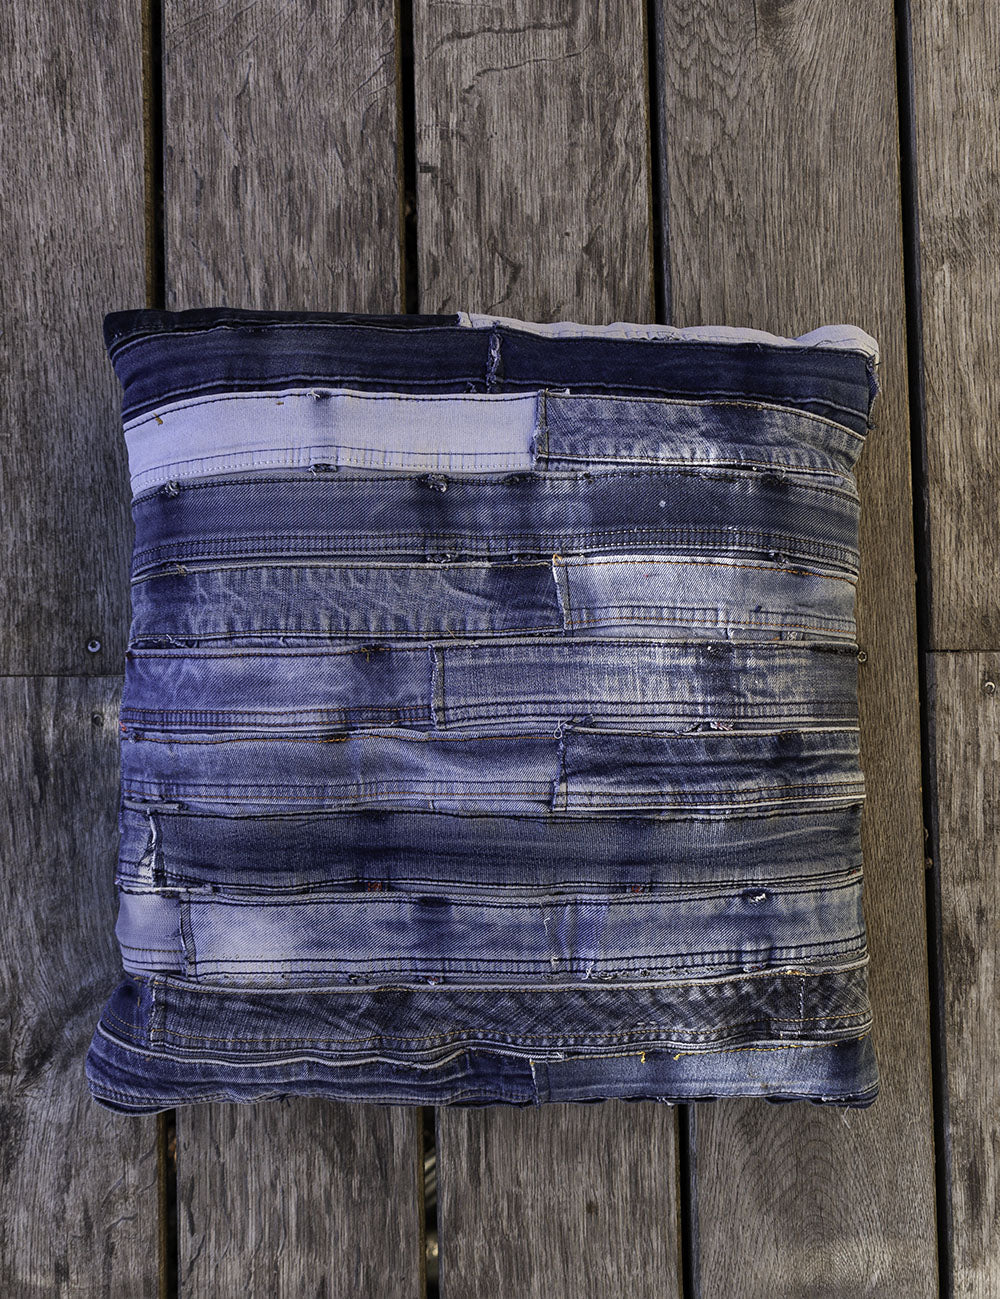 Cushion cover made from "dead stock" denim fabric in India